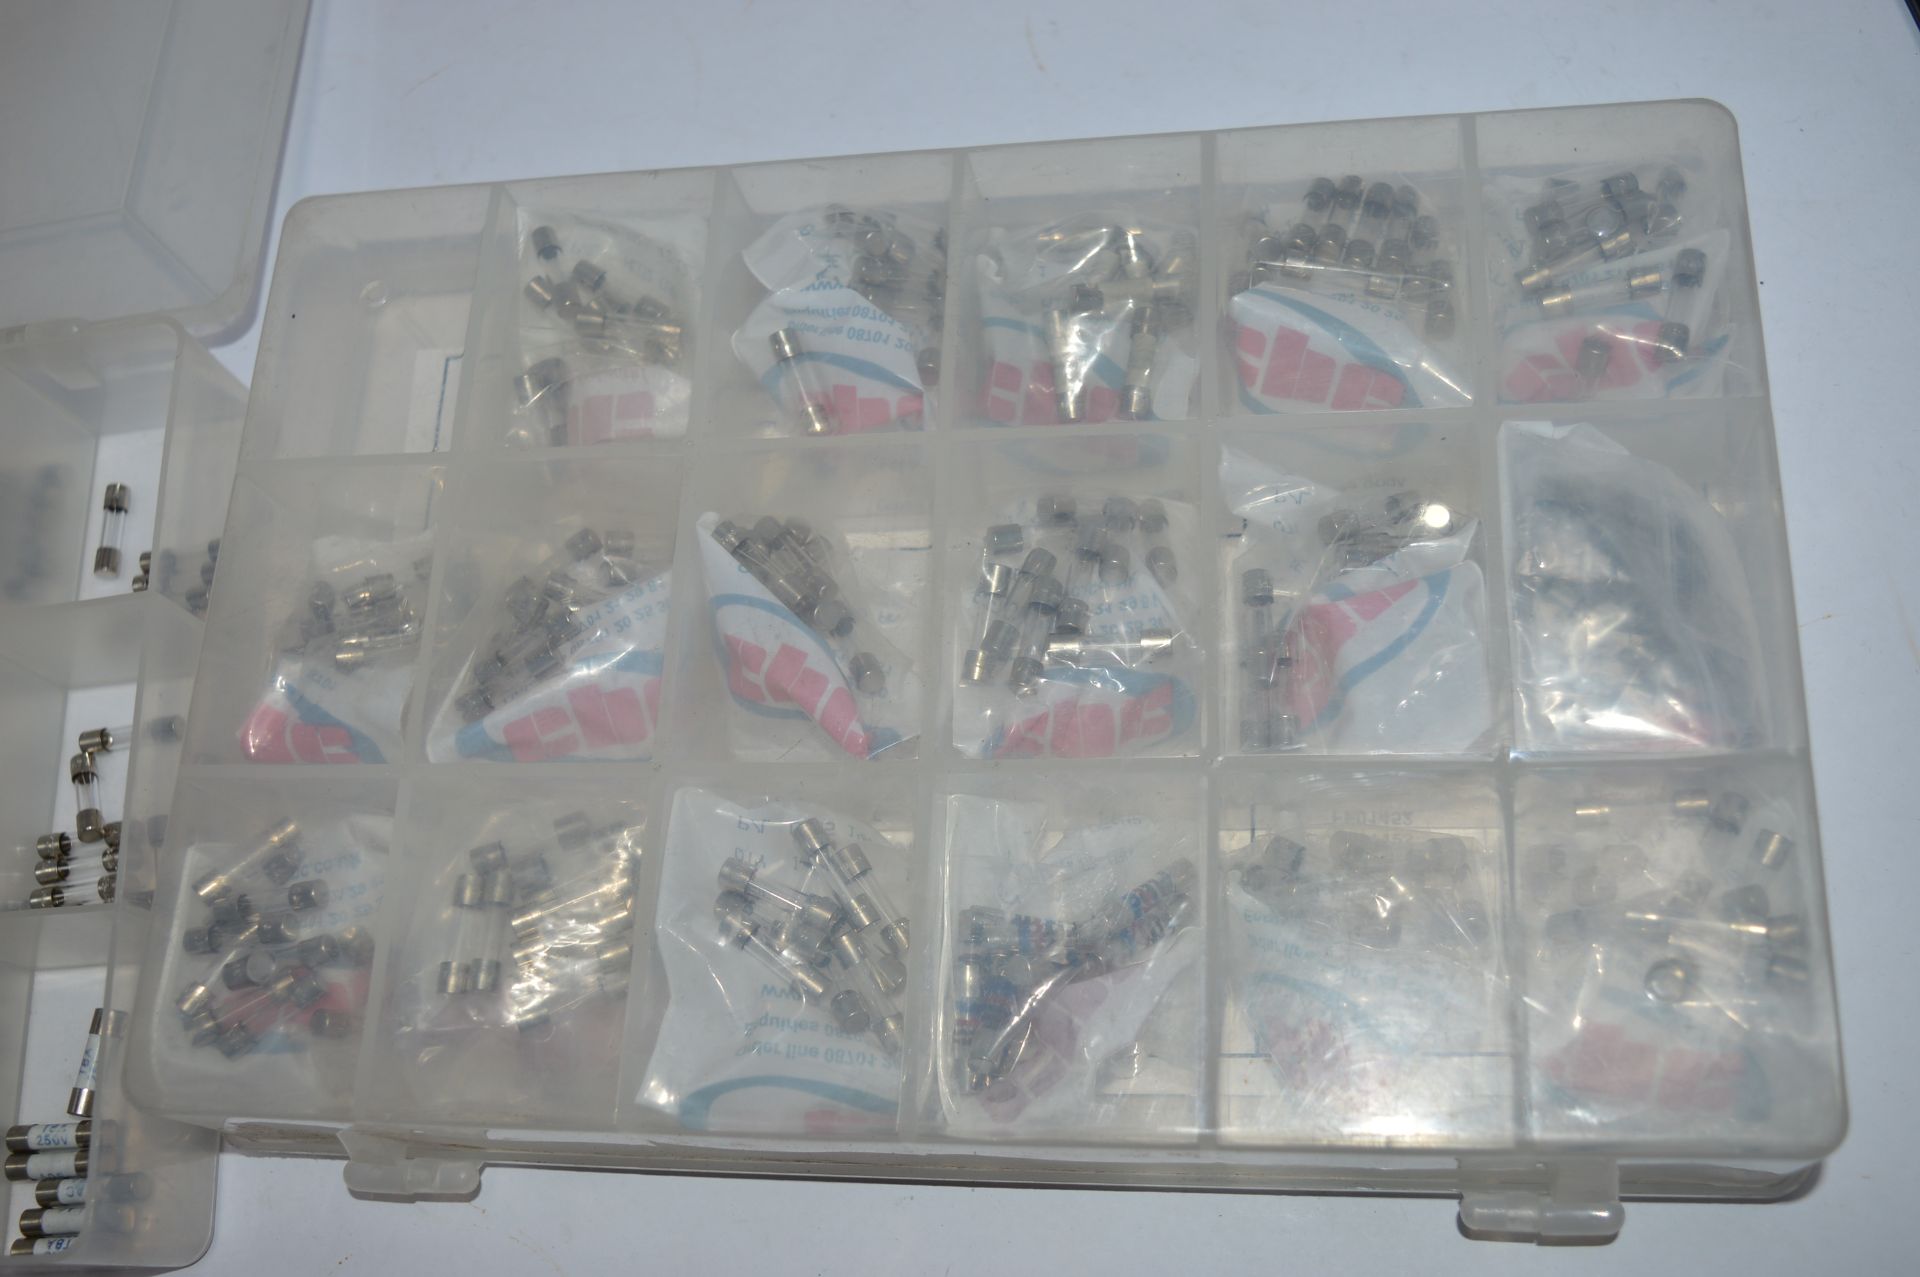 2 x CPC Fuse Kit Boxes - Includes 20 x Full Packs of Various Fuses and Approx 100 x Loose Unused - Image 6 of 9